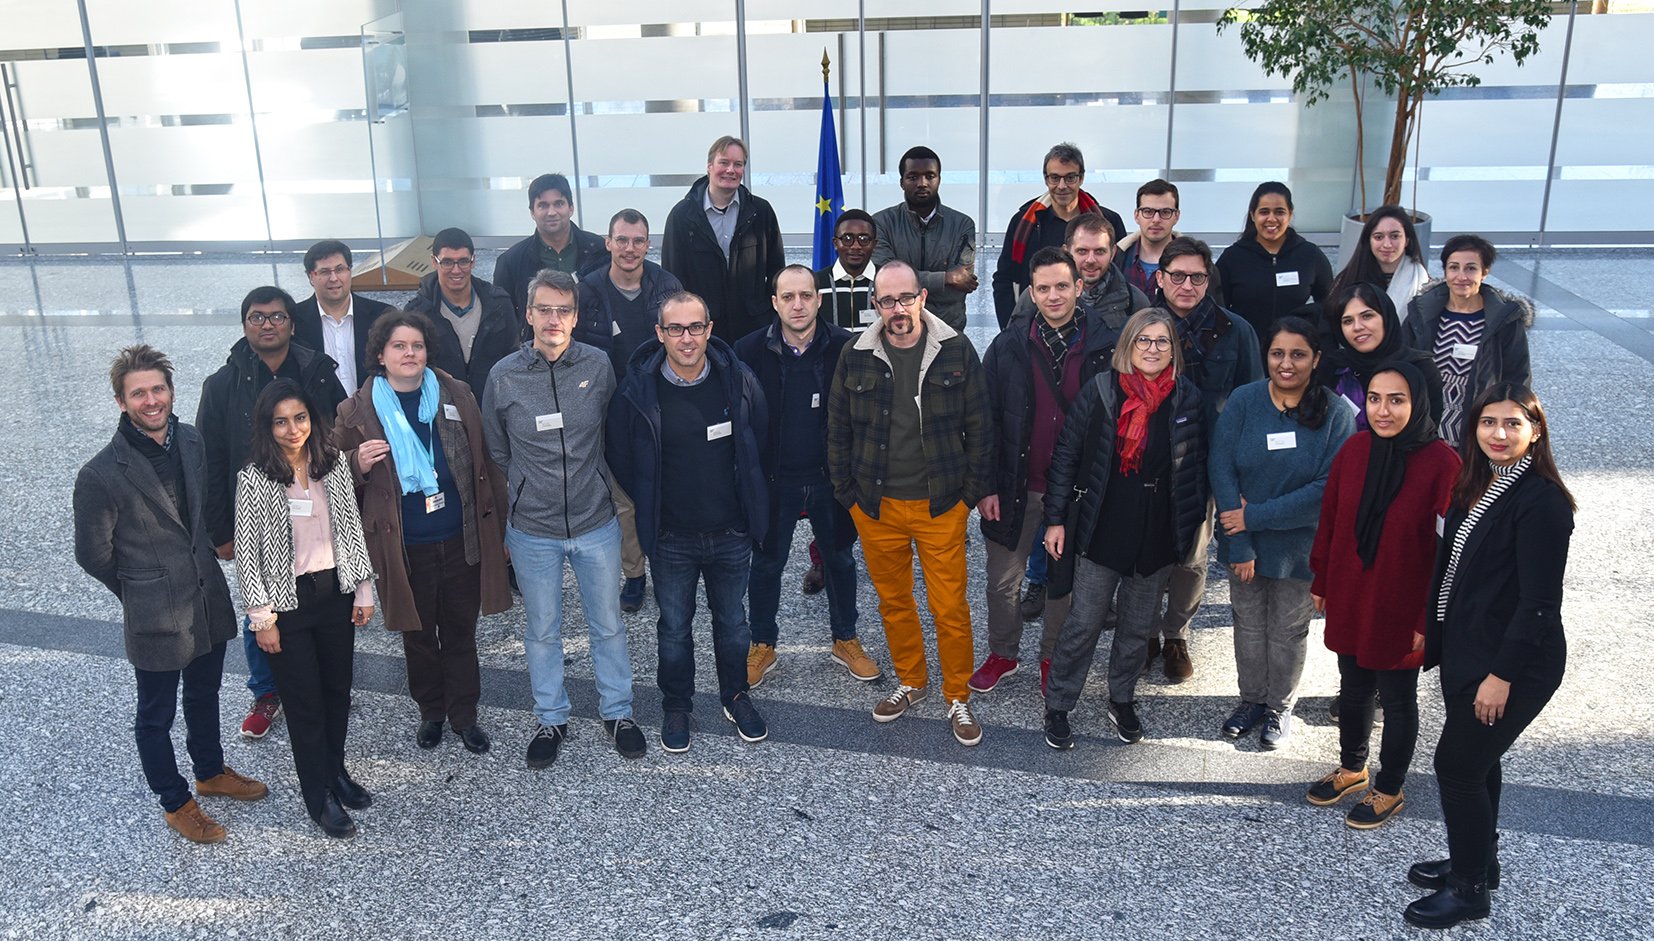 All Lowcomote team members in IMT Atlantique Day 1 (1)